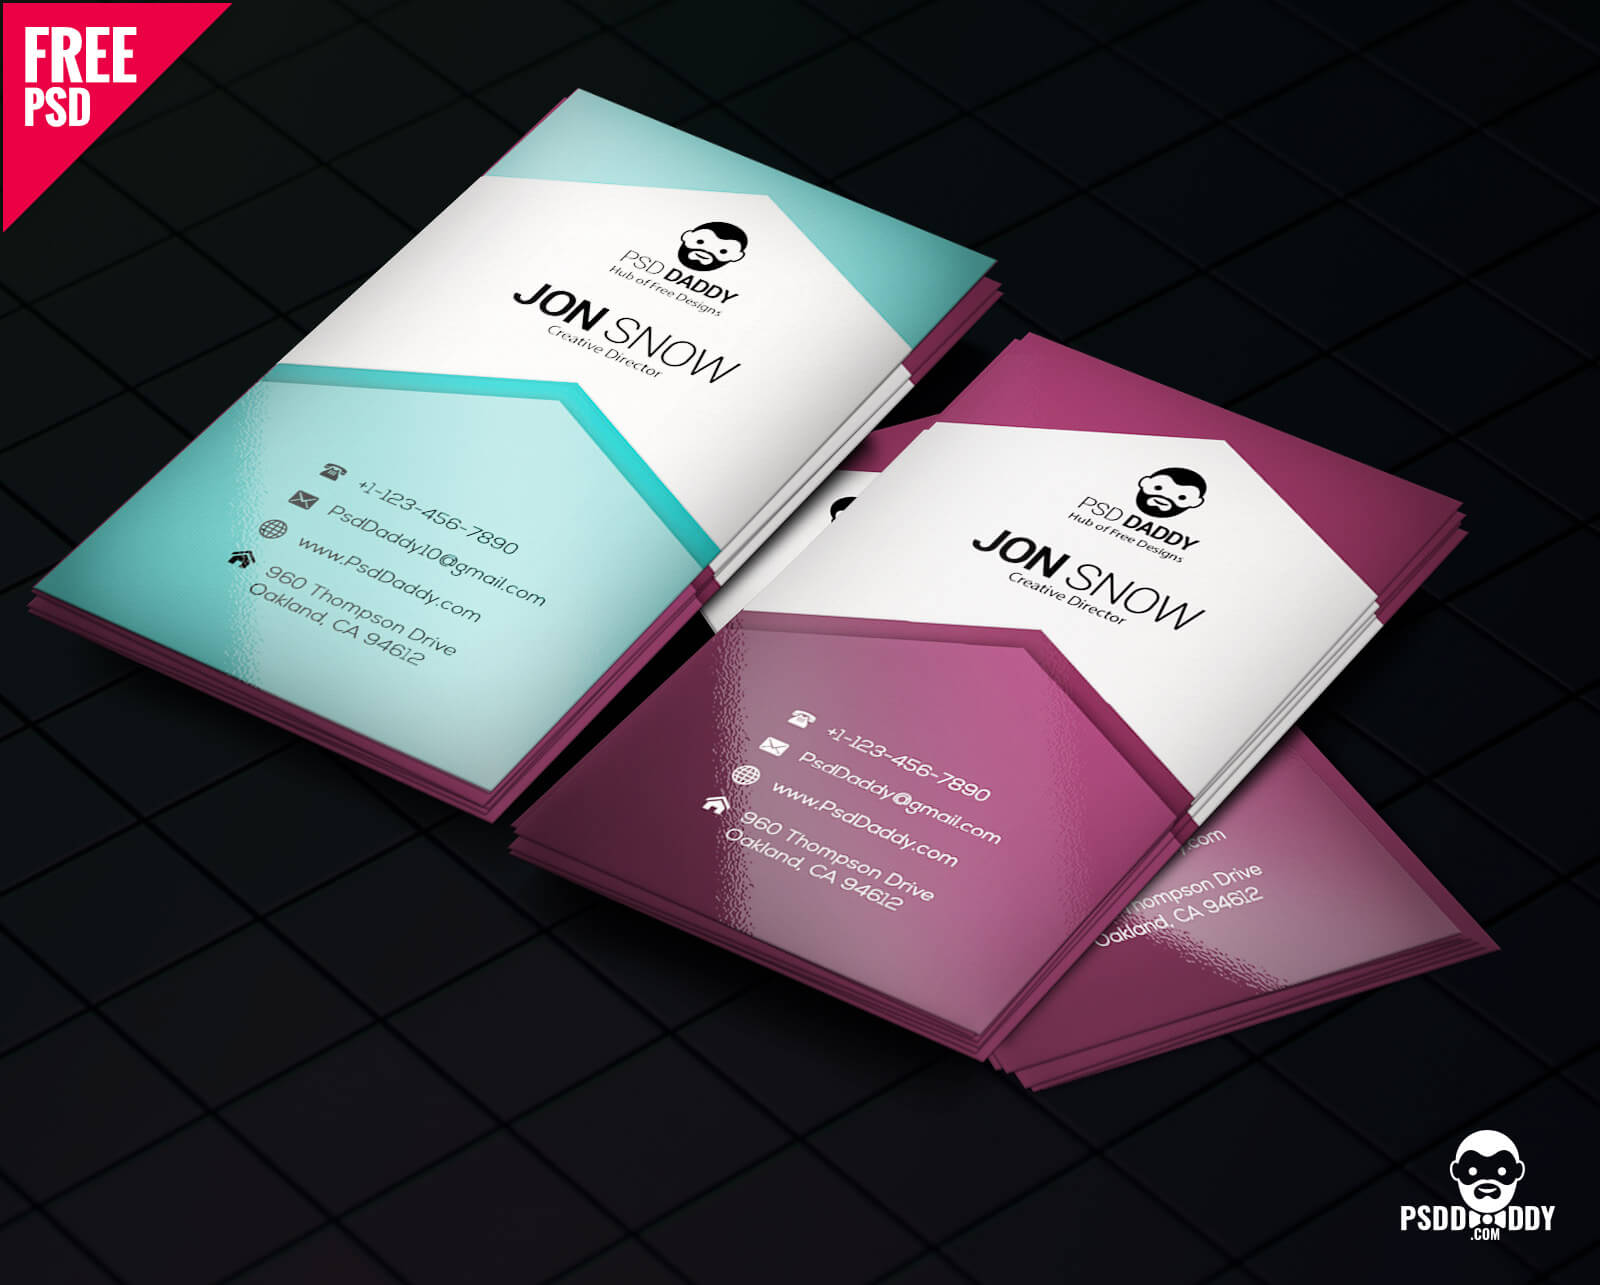 Download]Creative Business Card Psd Free | Psddaddy Throughout Visiting Card Templates Psd Free Download